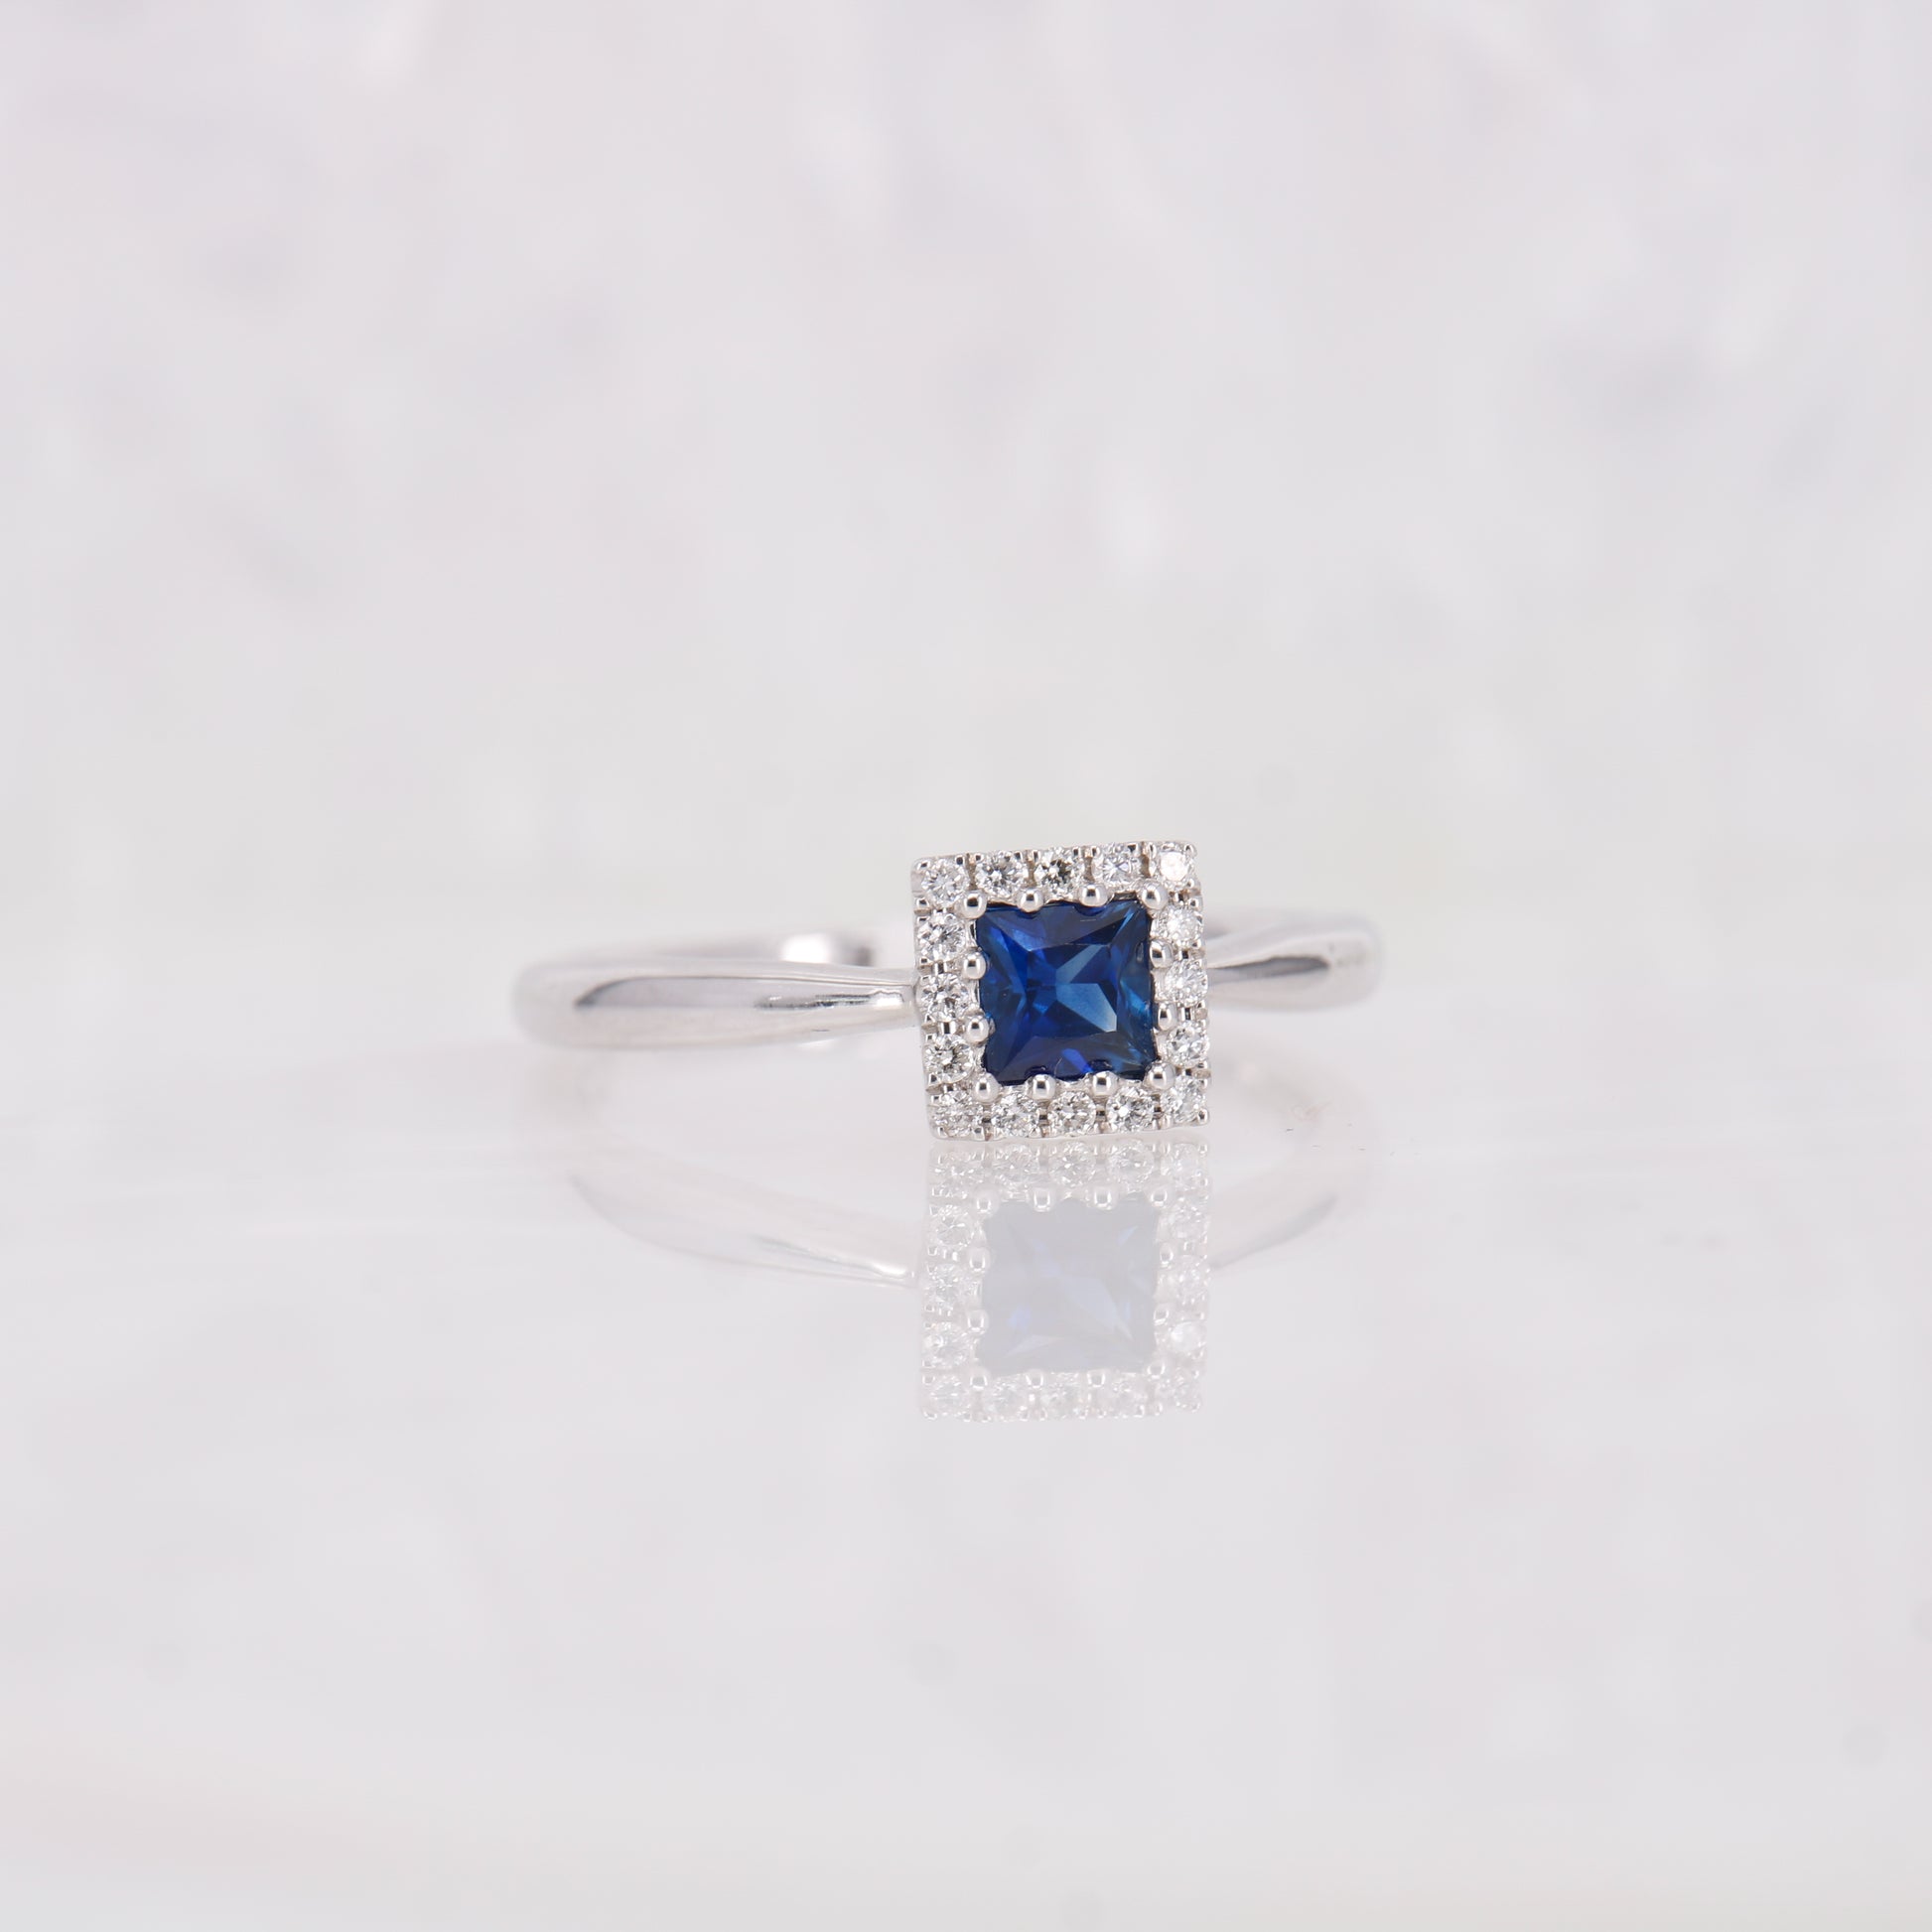 Sapphire and Diamond ring. Featuring a 0.45ct princess cut sapphire surrounded by a sparkling 0.10ct diamond halo.